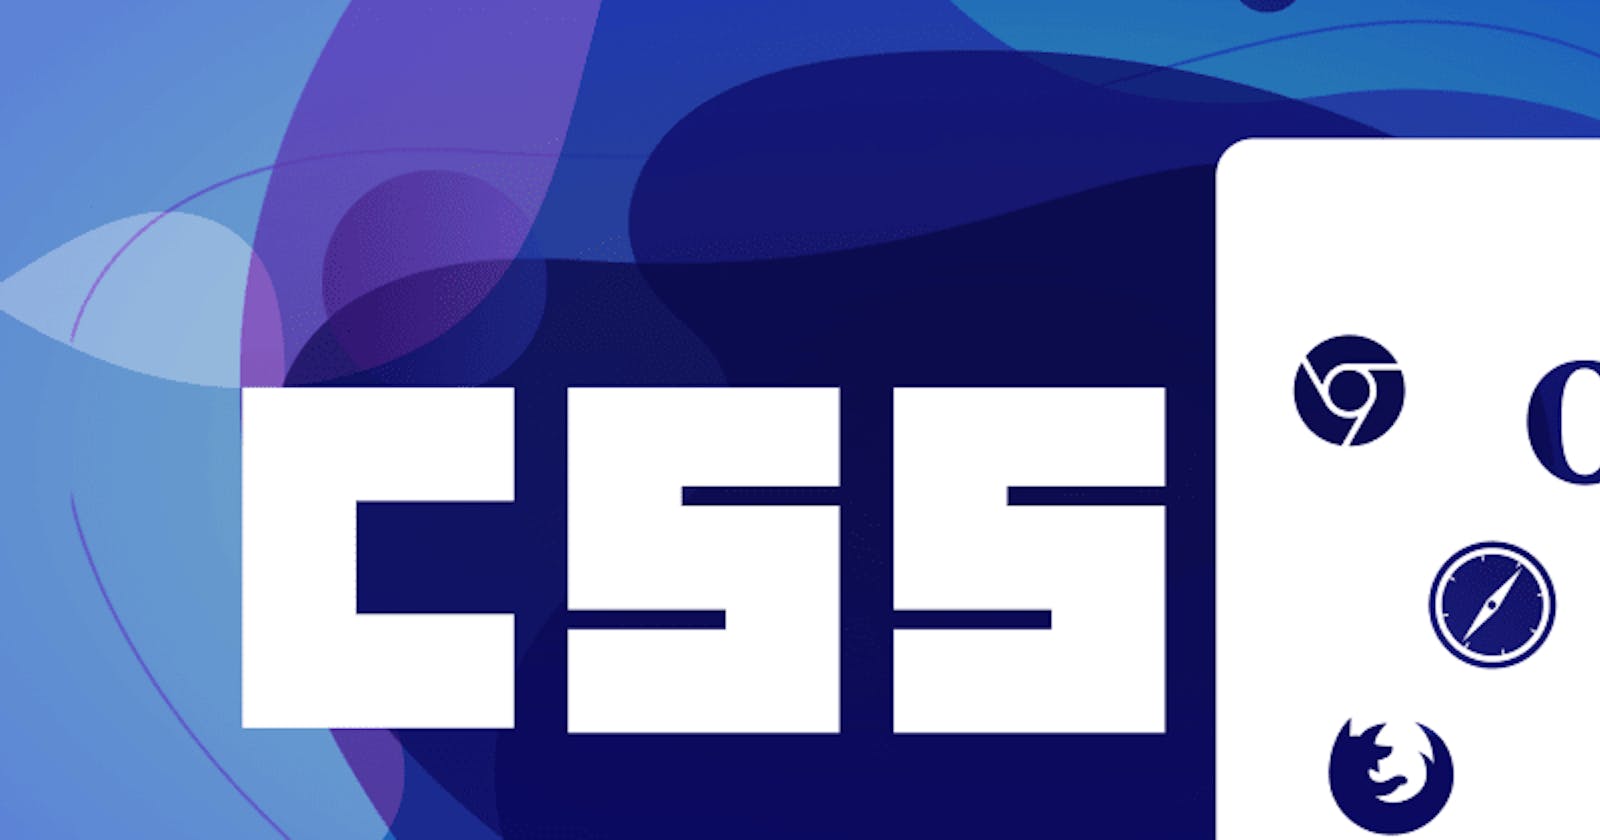 Implementing CSS for Older Browsers